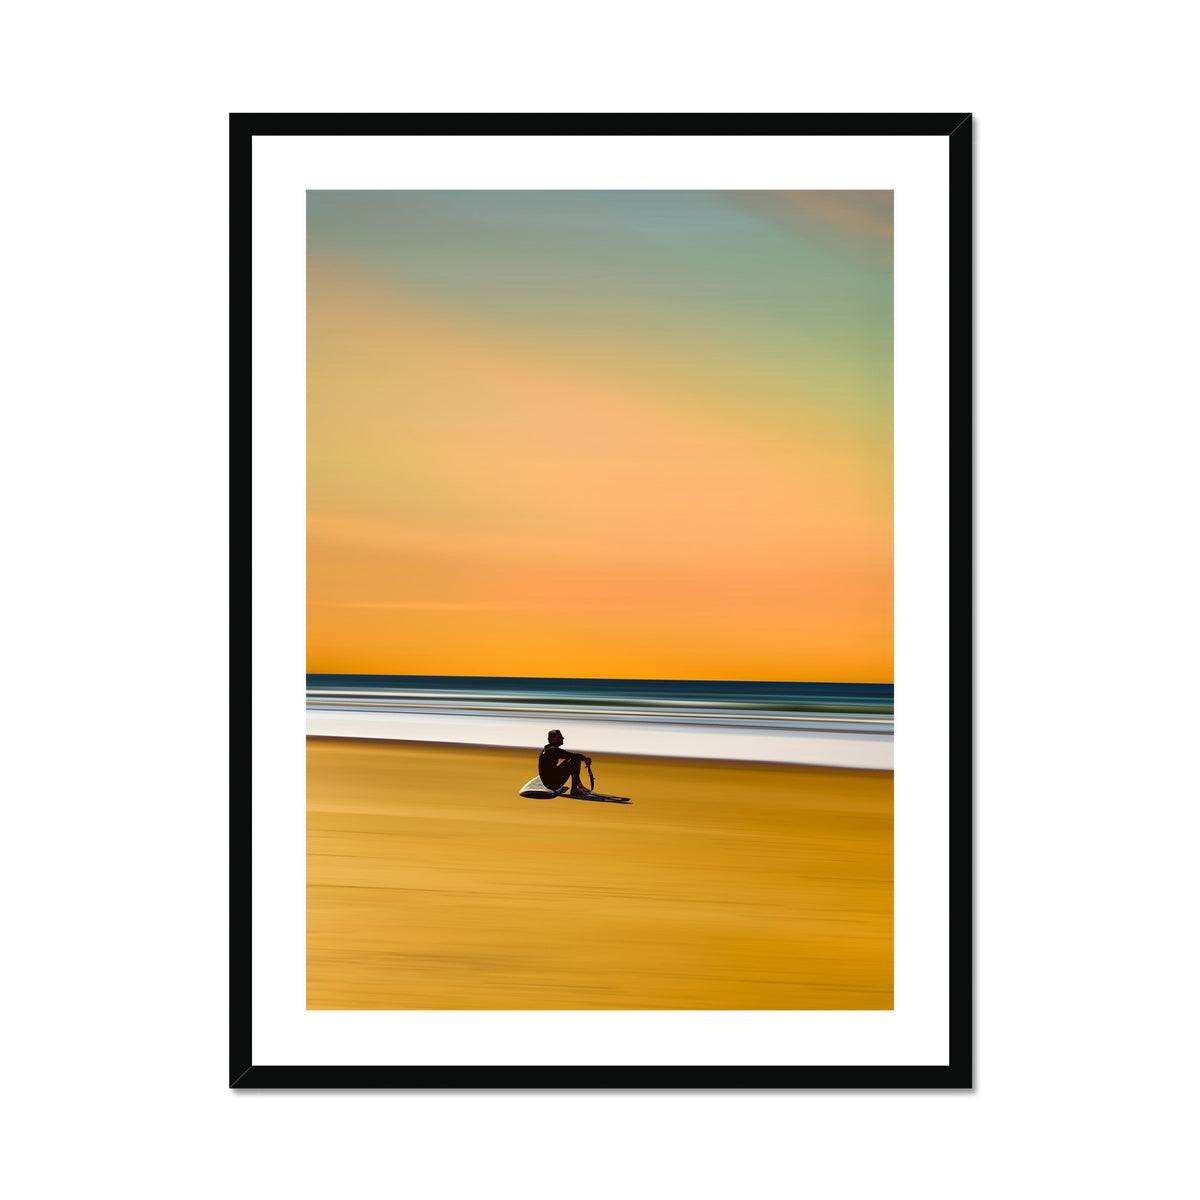 New Flow Framed & Mounted Print - Pixel Gallery